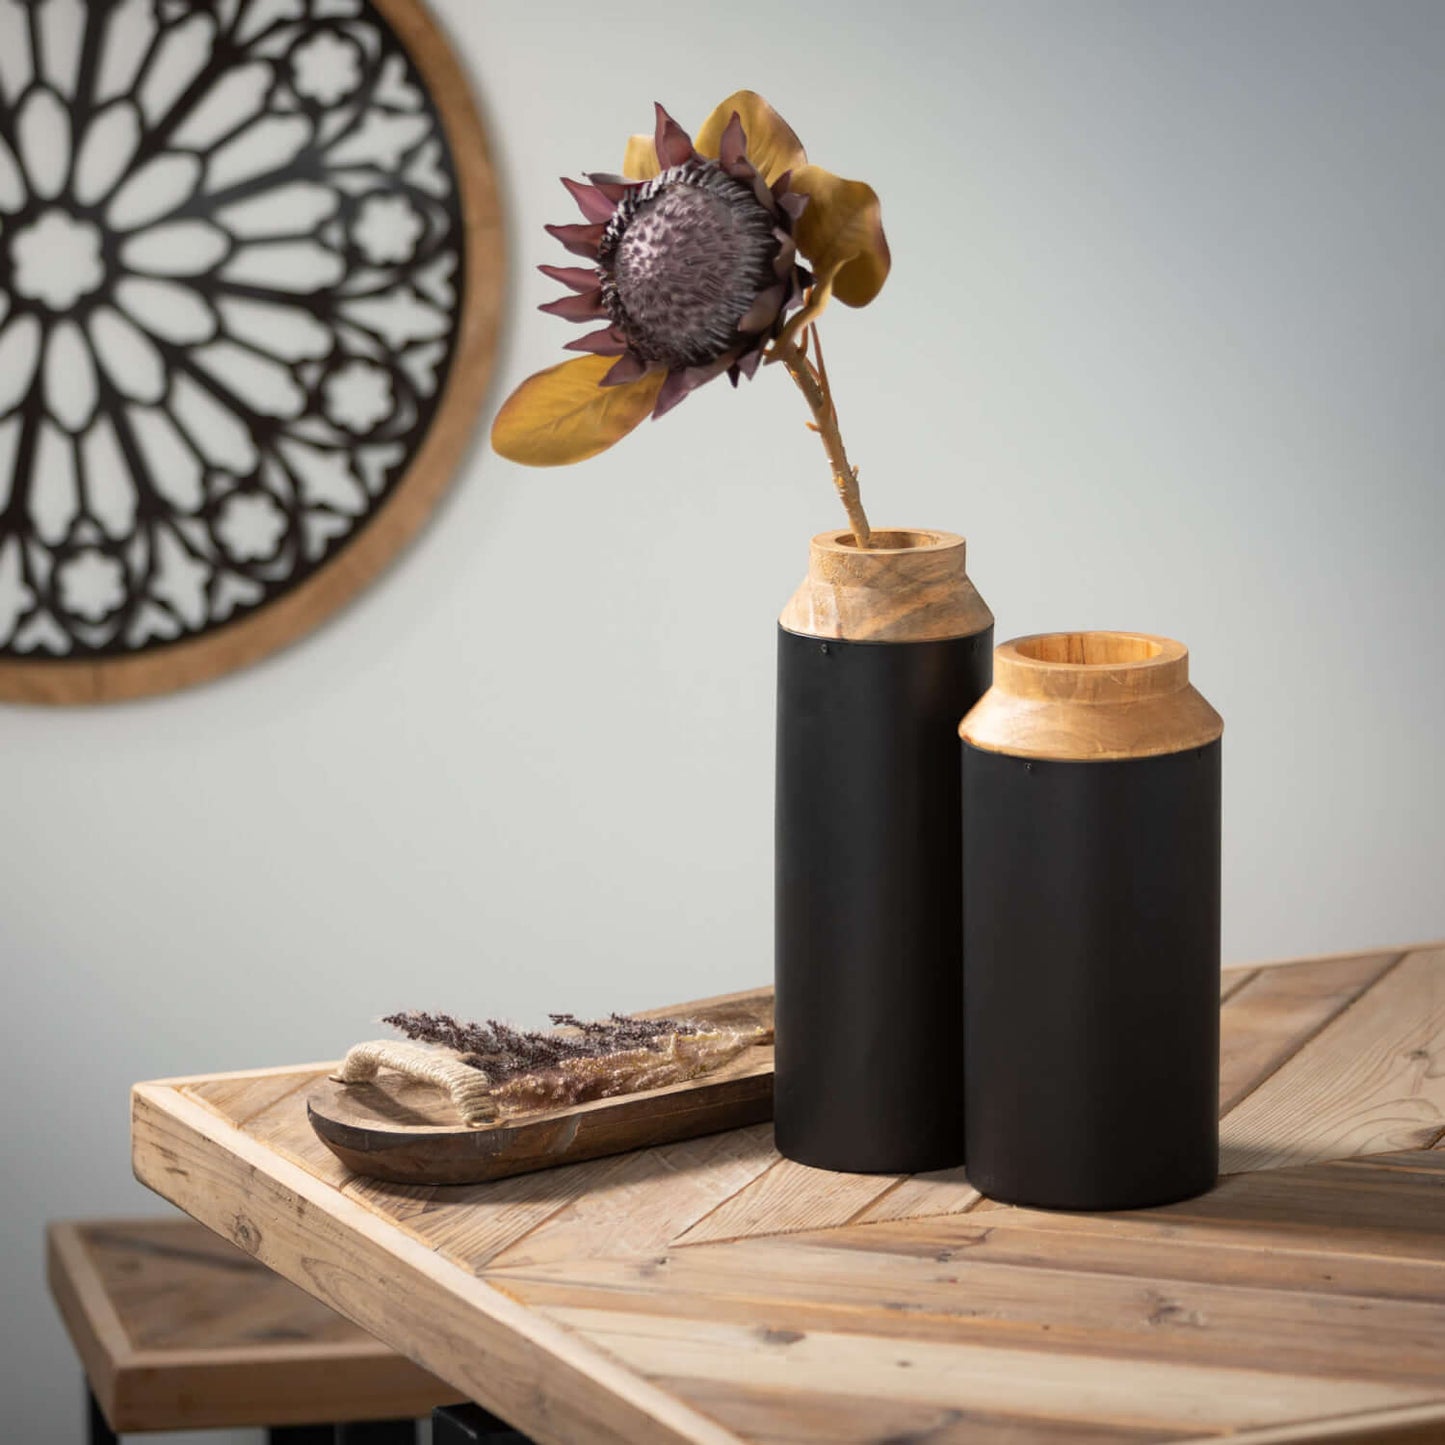 both sizes of metal and wood vases displayed on a rustic wood table with a large dried sunflower in the tallest one